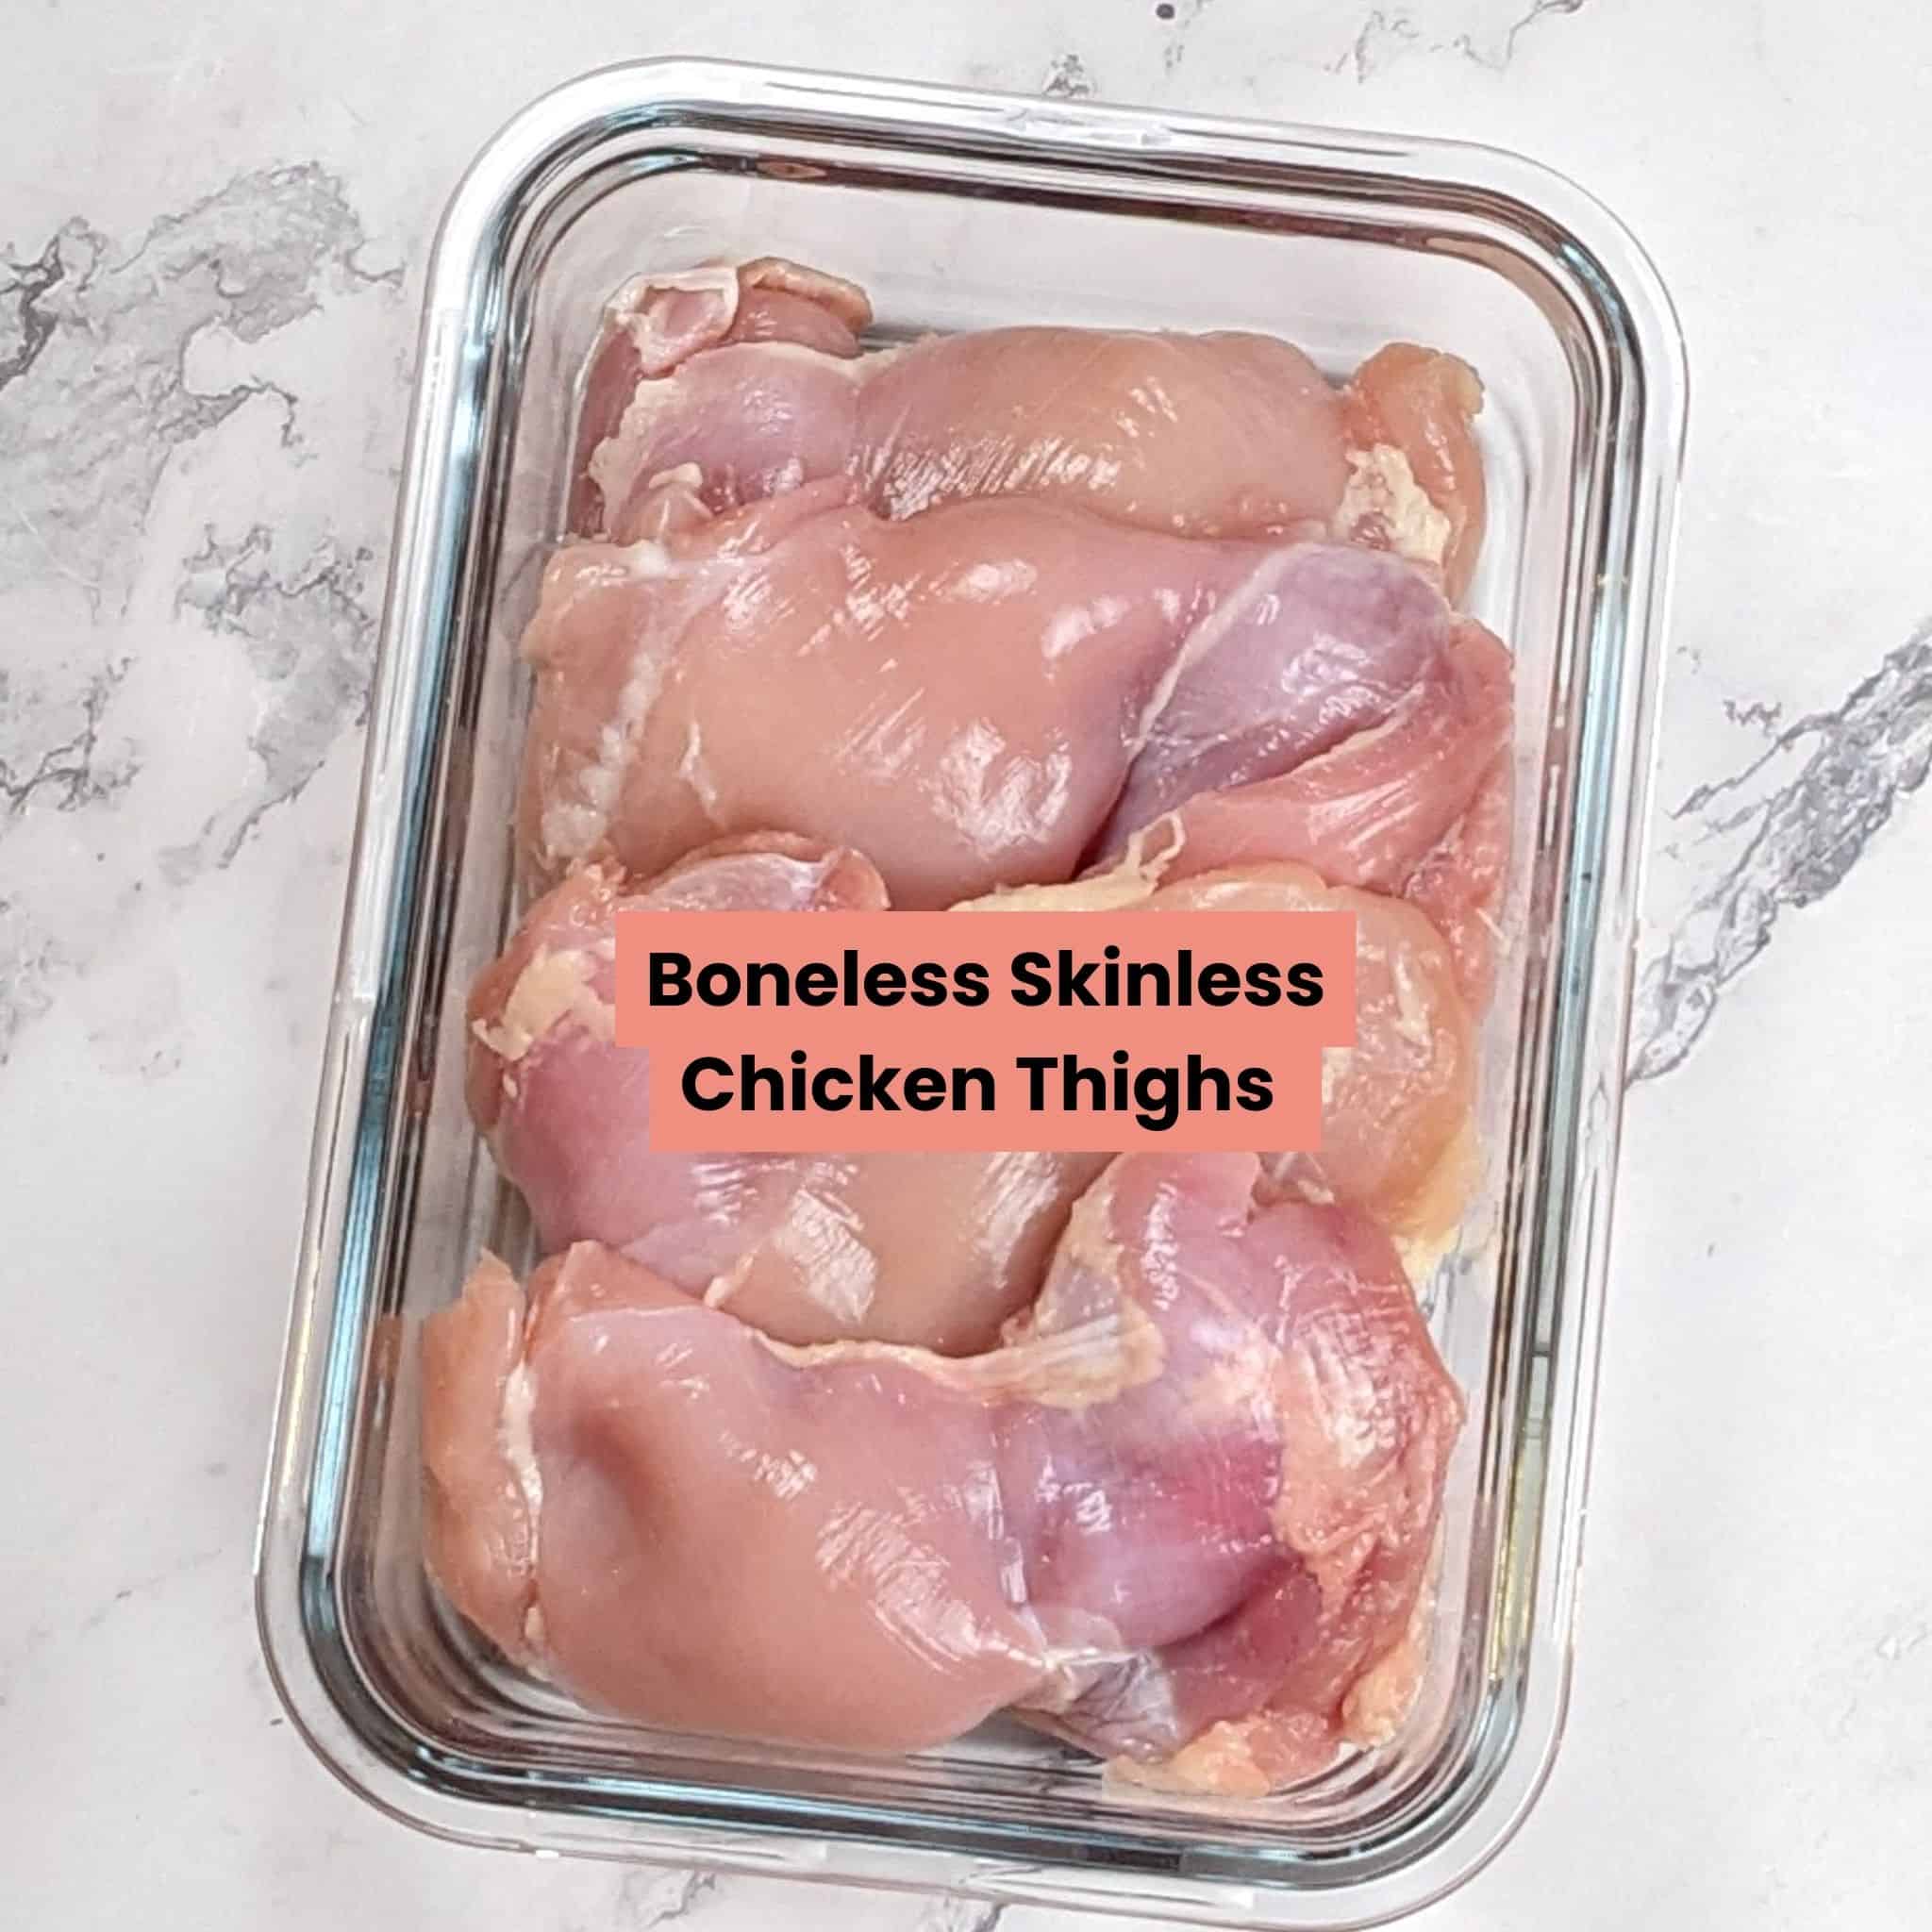 Boneless skinless chicken thighs cascaded in a rectangle glass container.